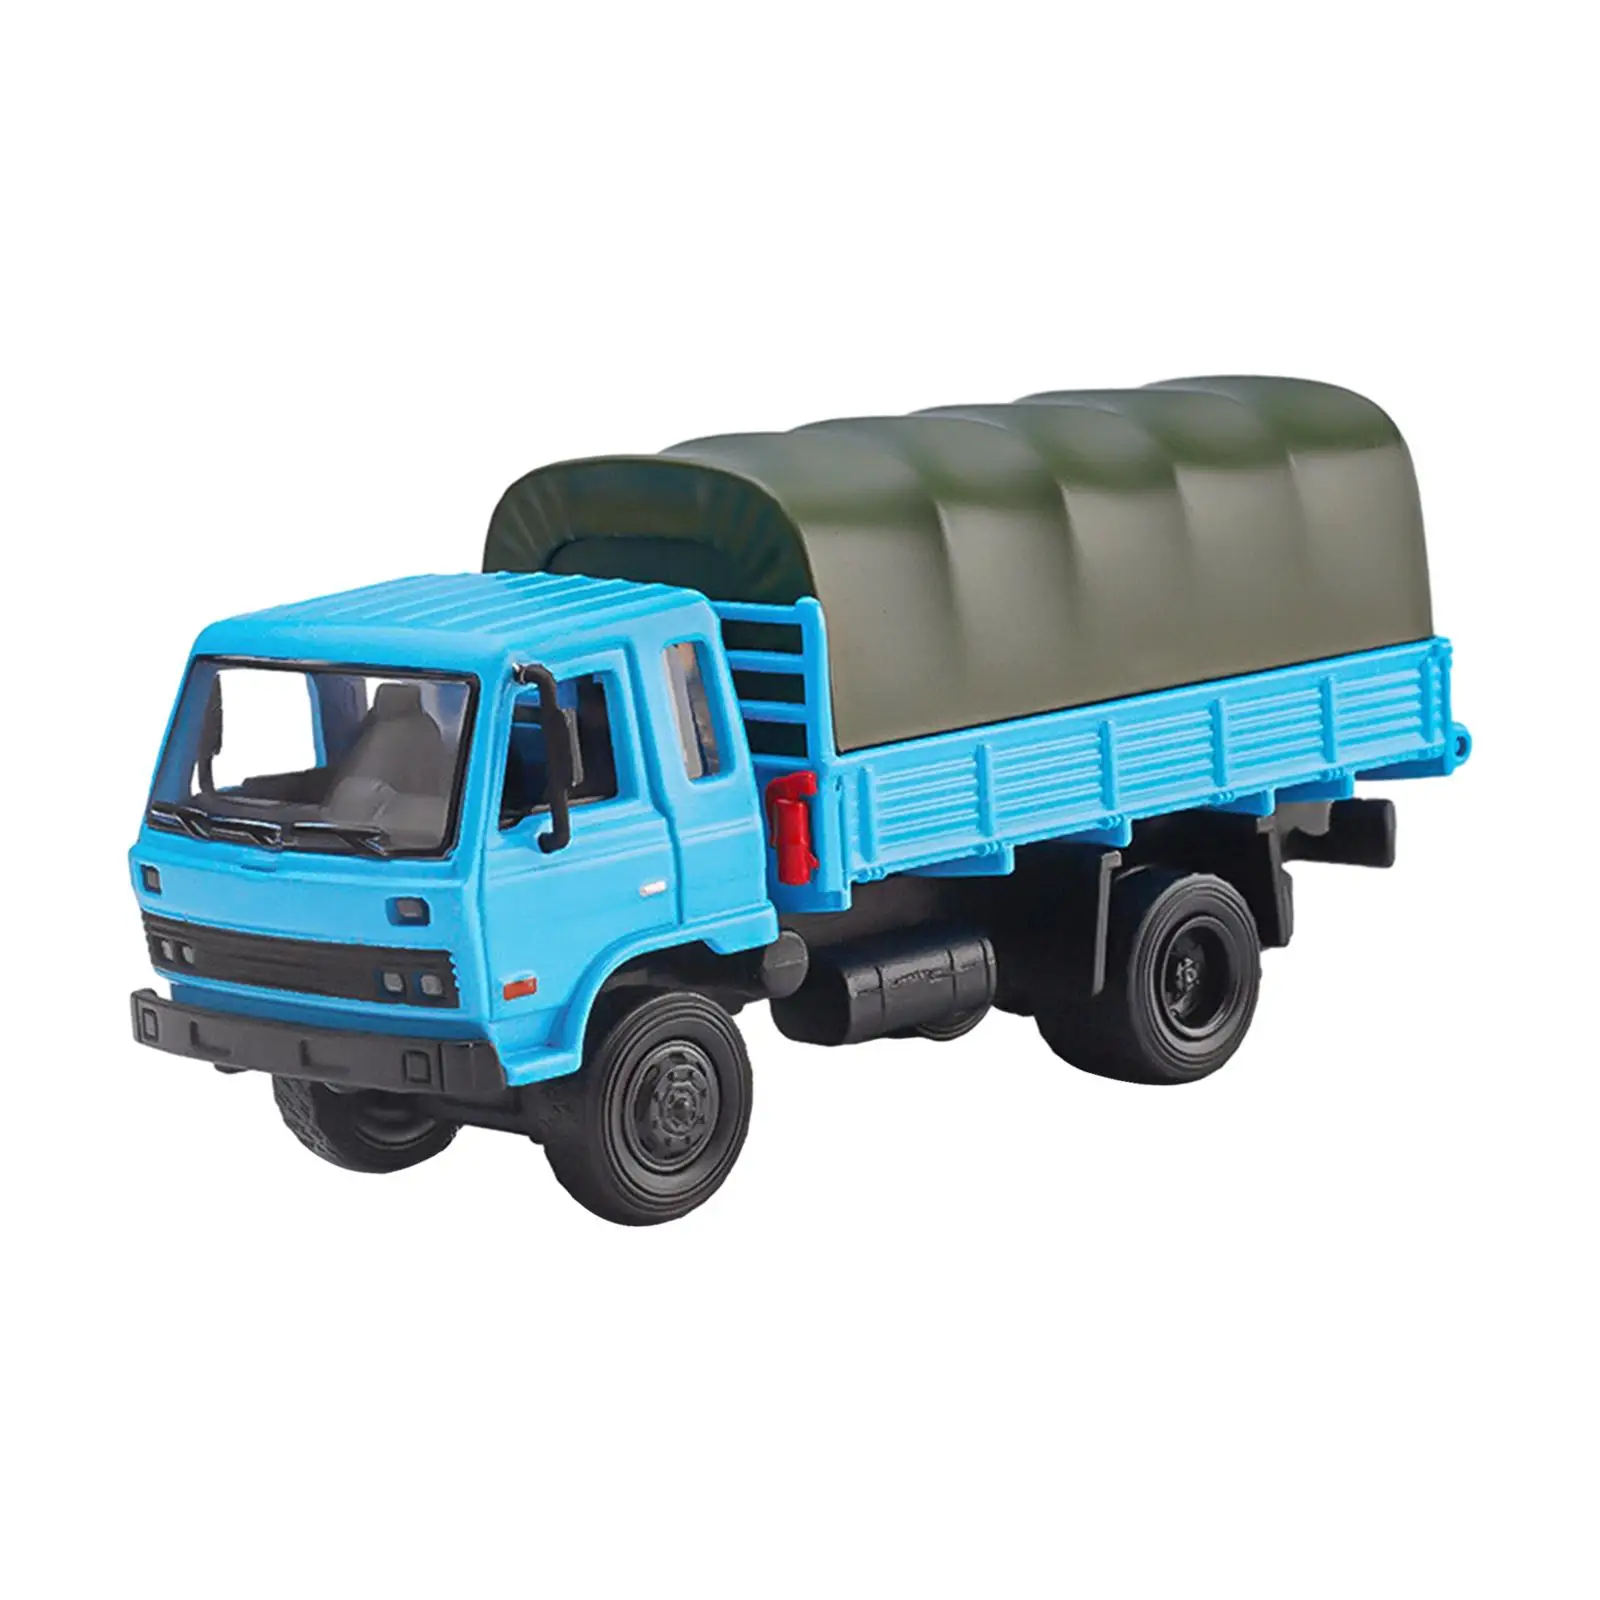 1/64 Transport Vehicle Hand Painted Layout Alloy Truck for Kids Adults Decor